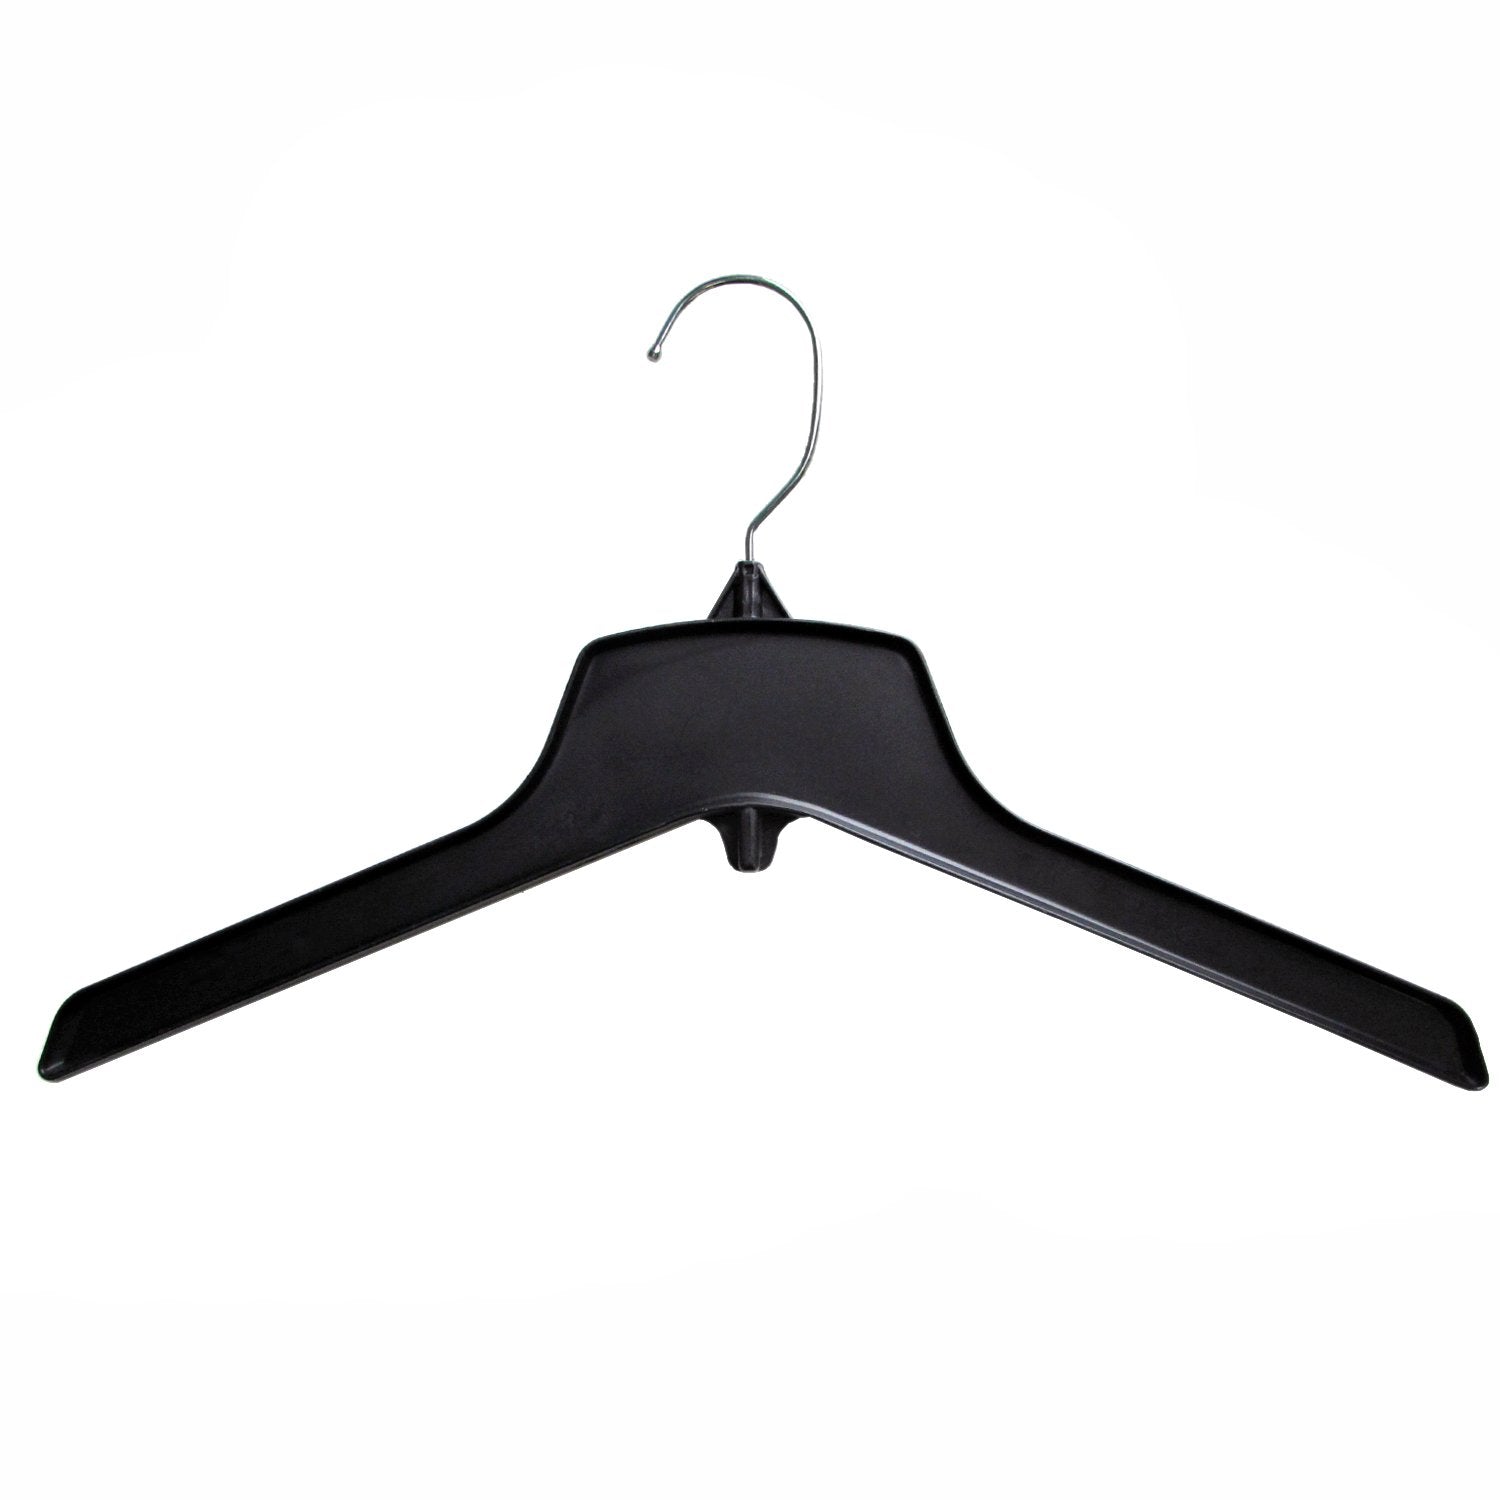 Hanger Central Recycled Heavy Duty Plastic Coat Hangers with Short Polished Metal Swivel Hooks Outerwear Hangers, 15 Inch, Black, 25 Pack